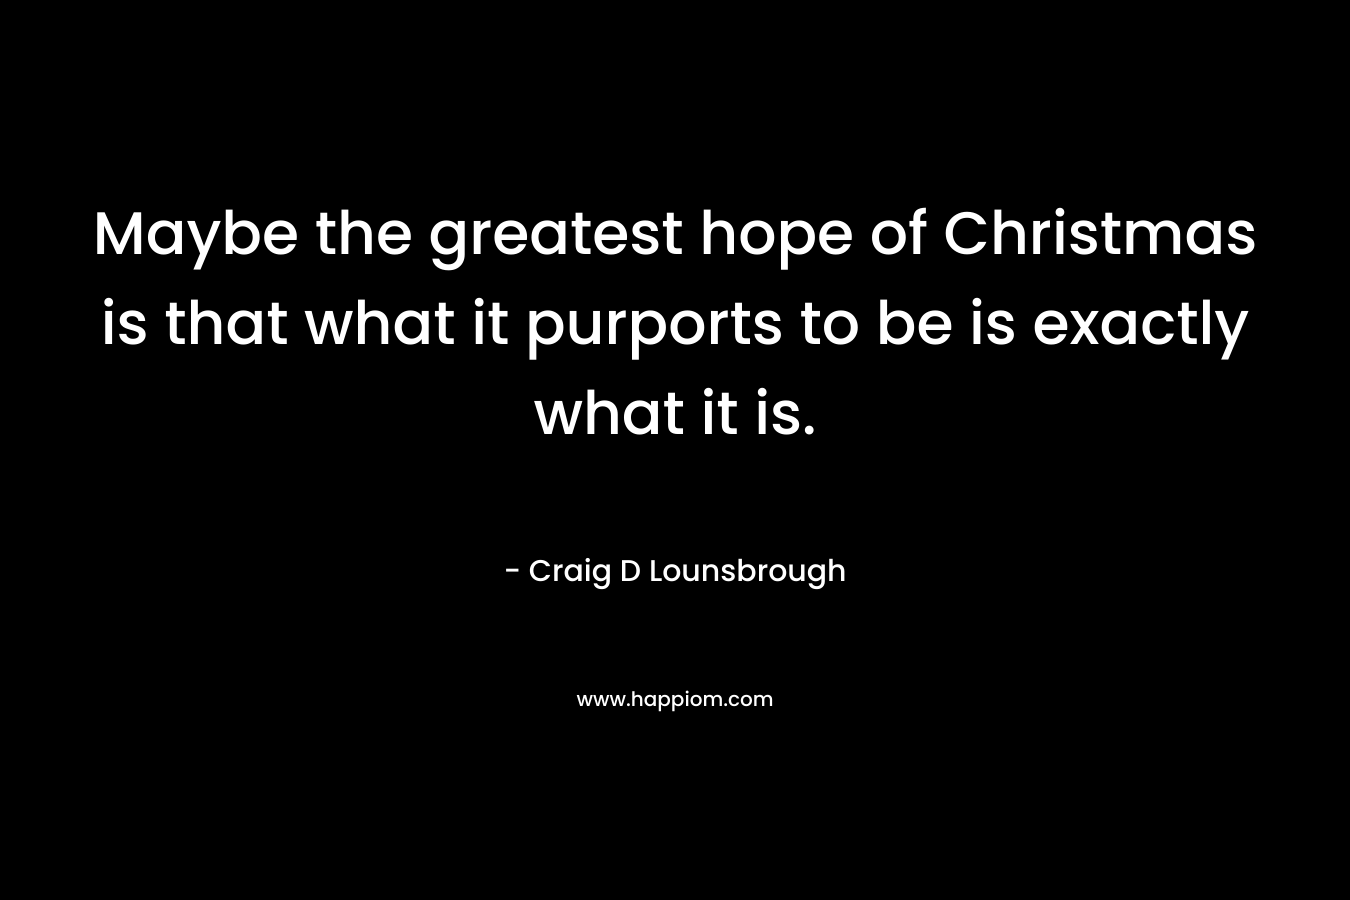 Maybe the greatest hope of Christmas is that what it purports to be is exactly what it is. – Craig D Lounsbrough